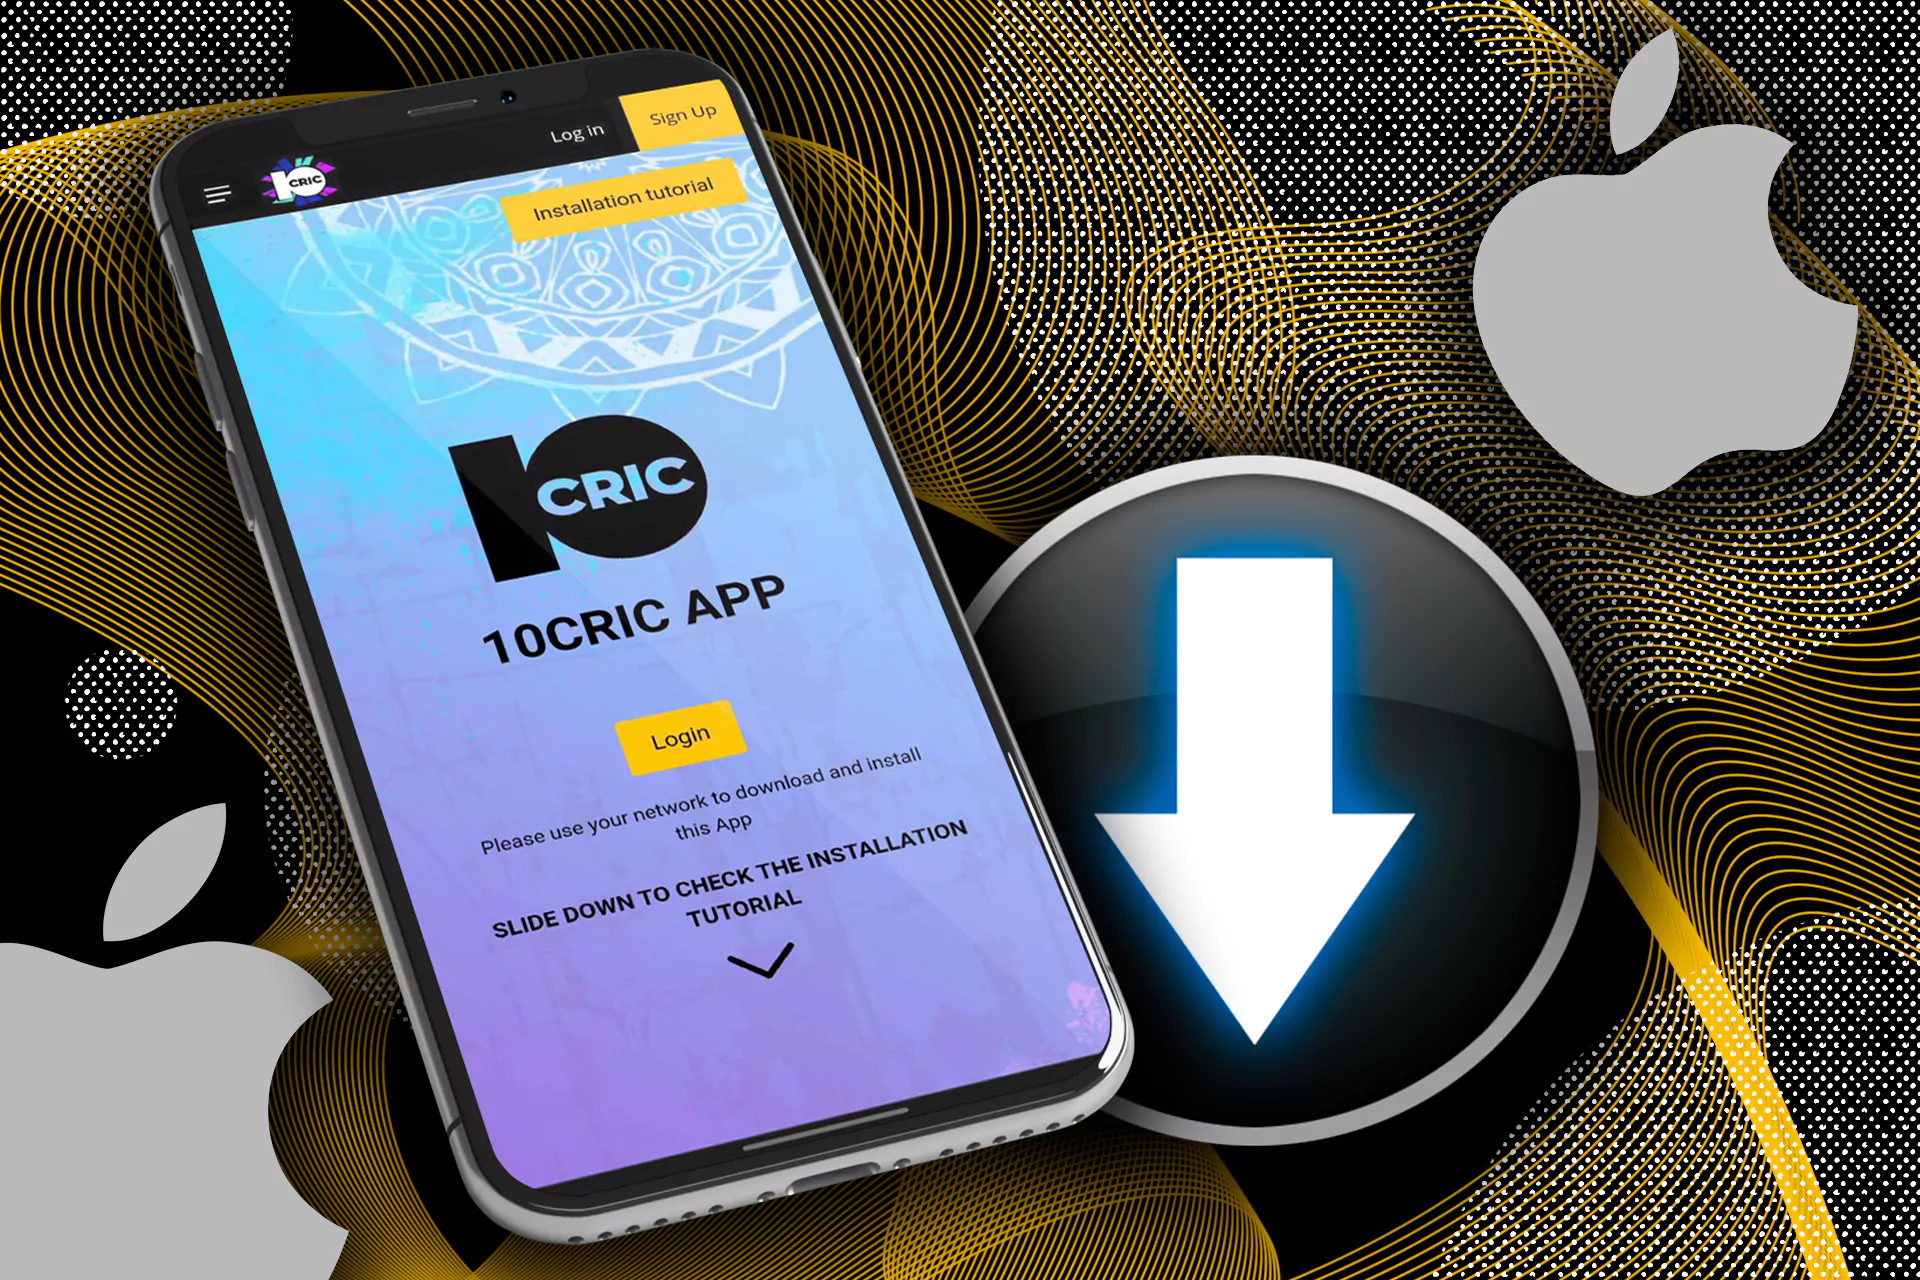 The iPhones owners also can download and install the iOS version of the 10cric app.